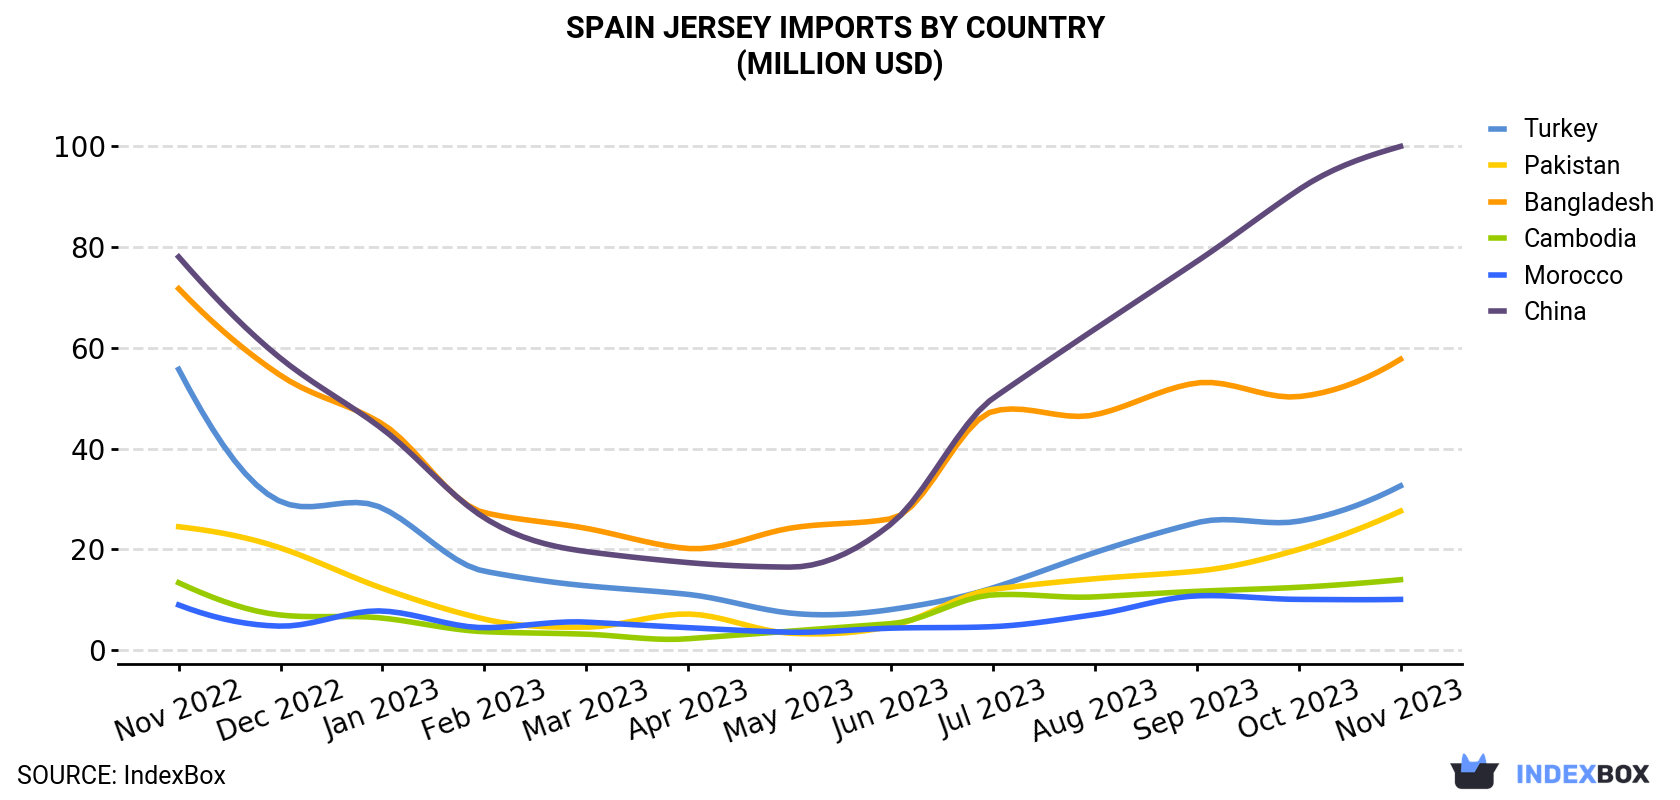 Spain Jersey Imports By Country (Million USD)